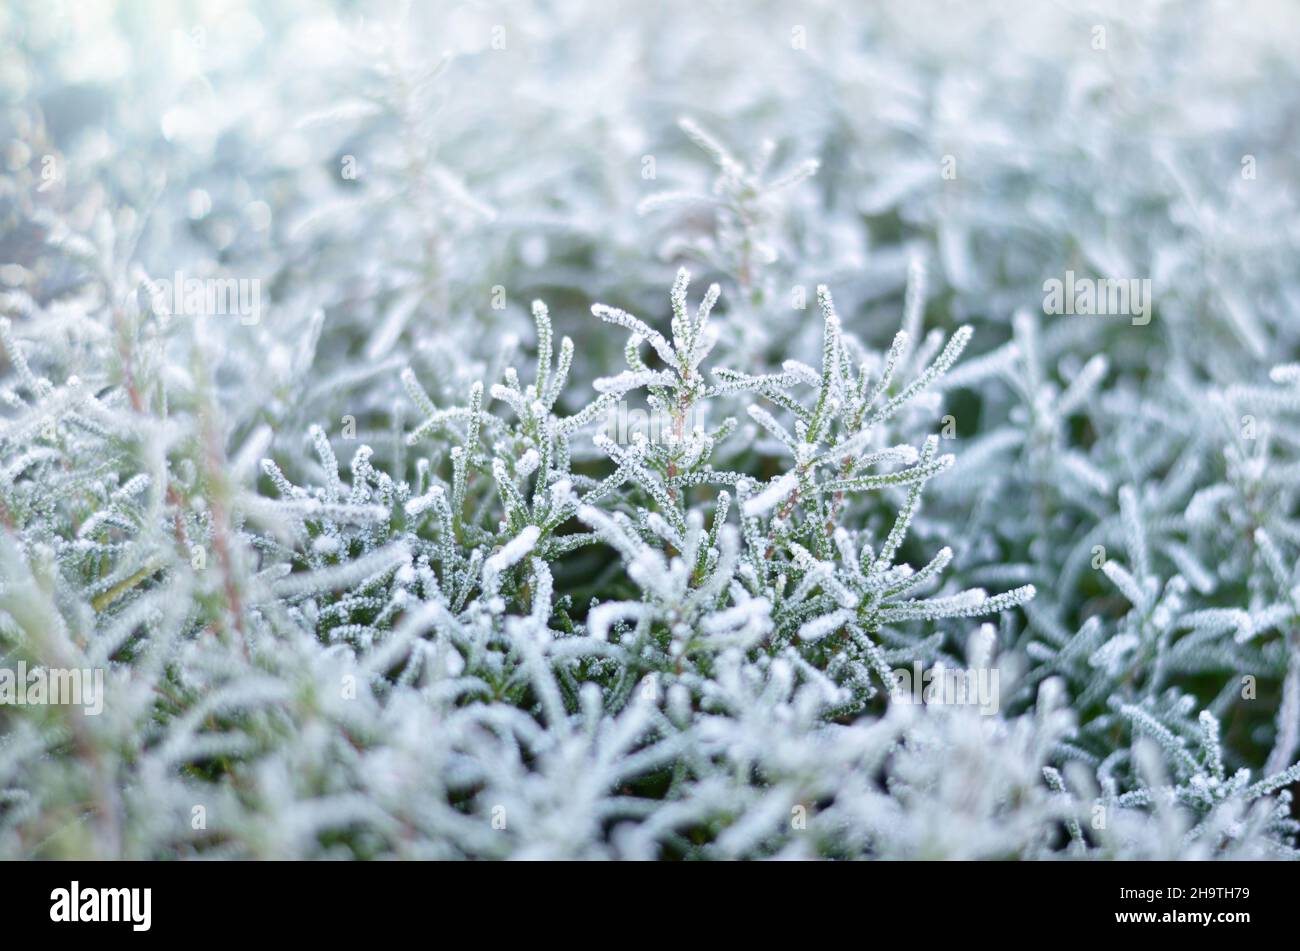 Hoar frost on plants at a cold winter day. Weather conditions in winter. Close-up, selective focus. Stock Photo